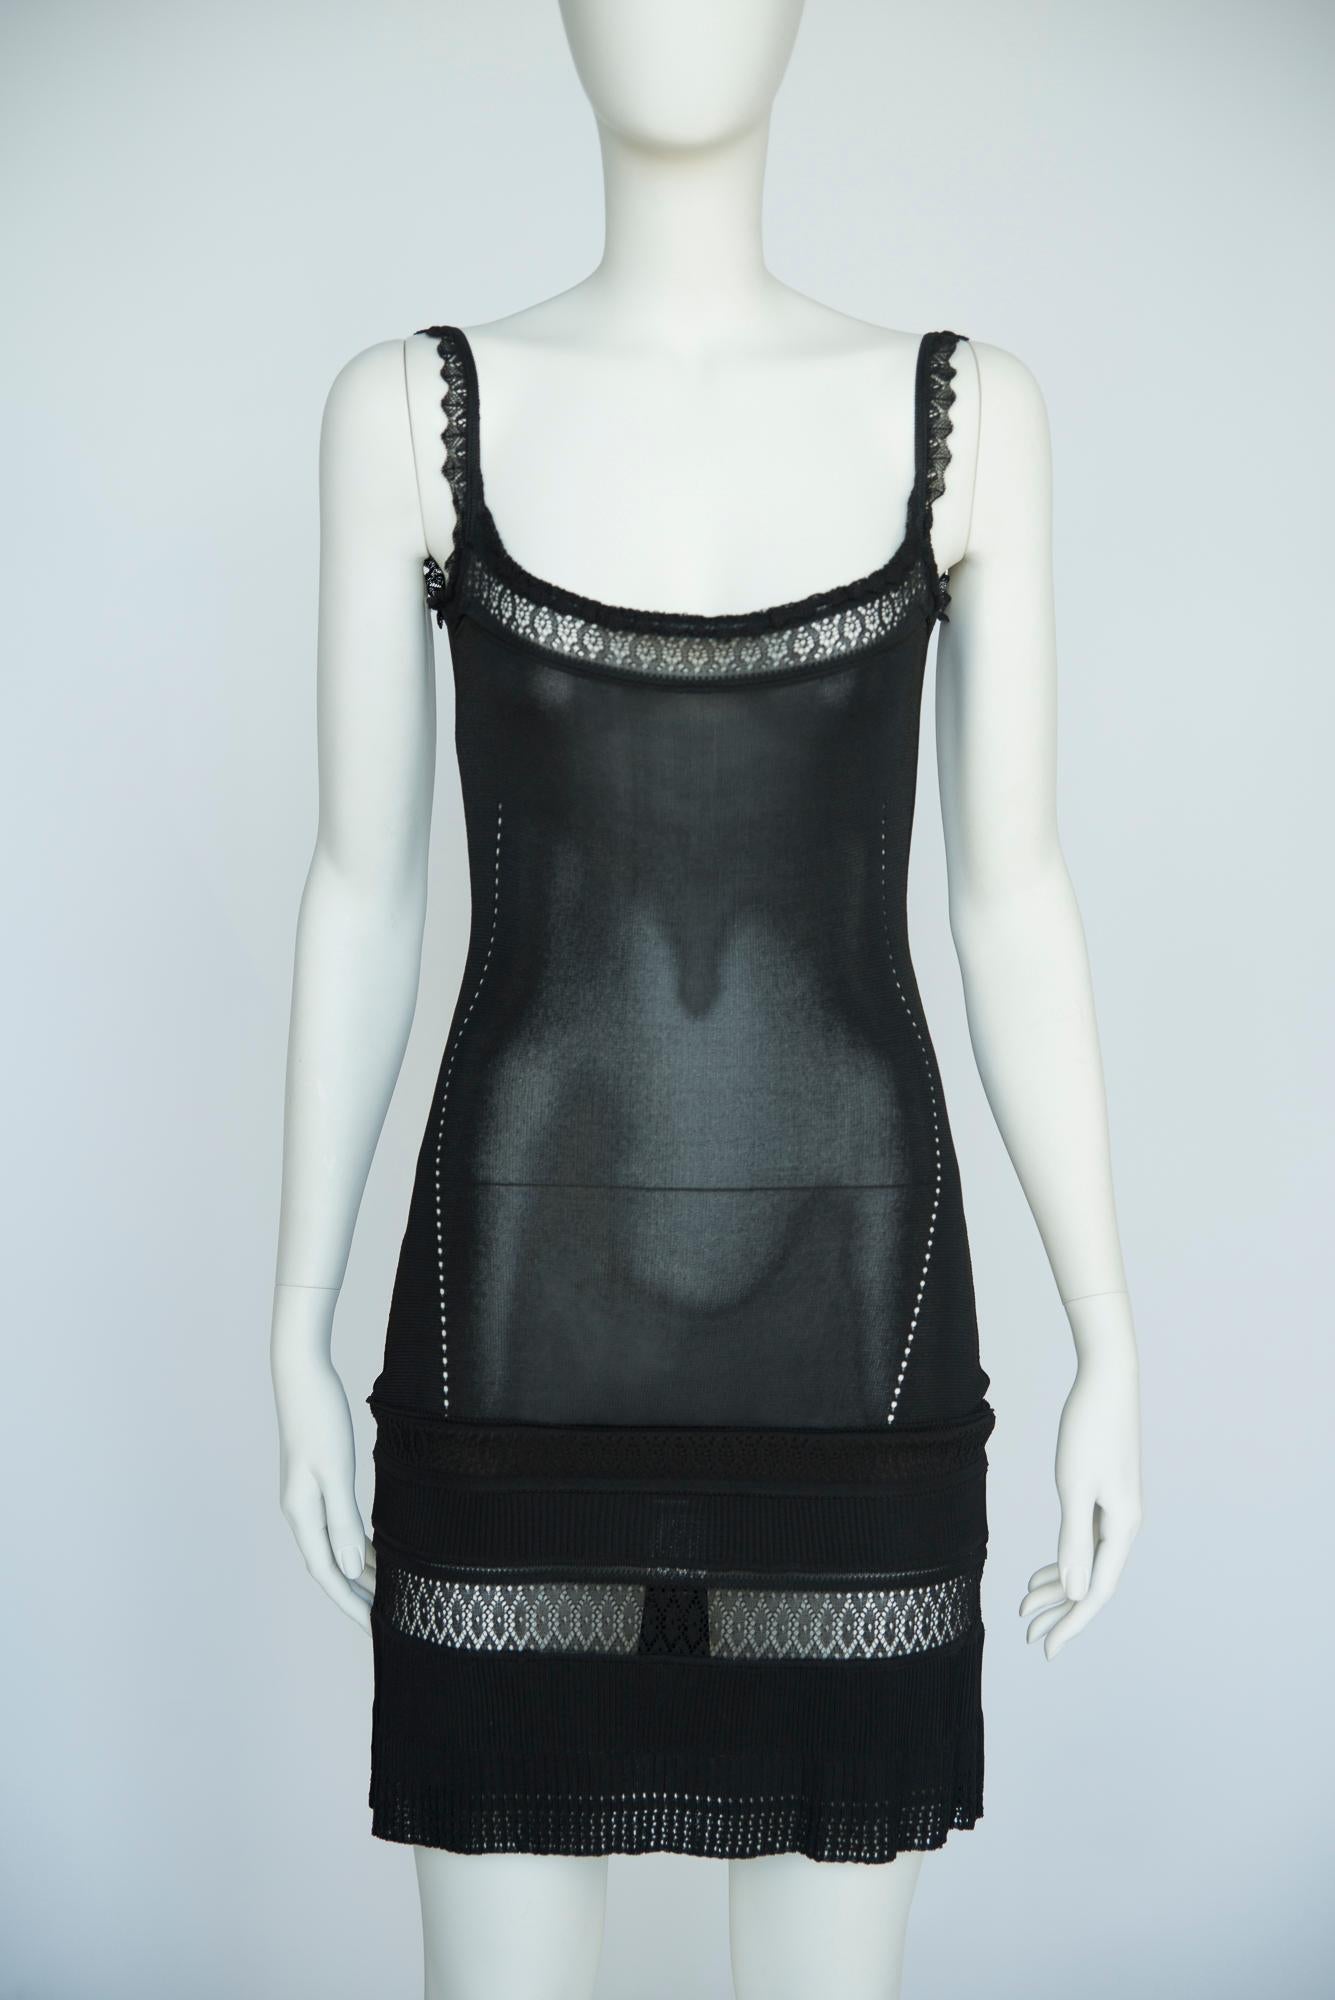 Christian Dior By John Galliano Crochet-Knit Slip Dress, Spring-Summer 1998 In Excellent Condition For Sale In Geneva, CH